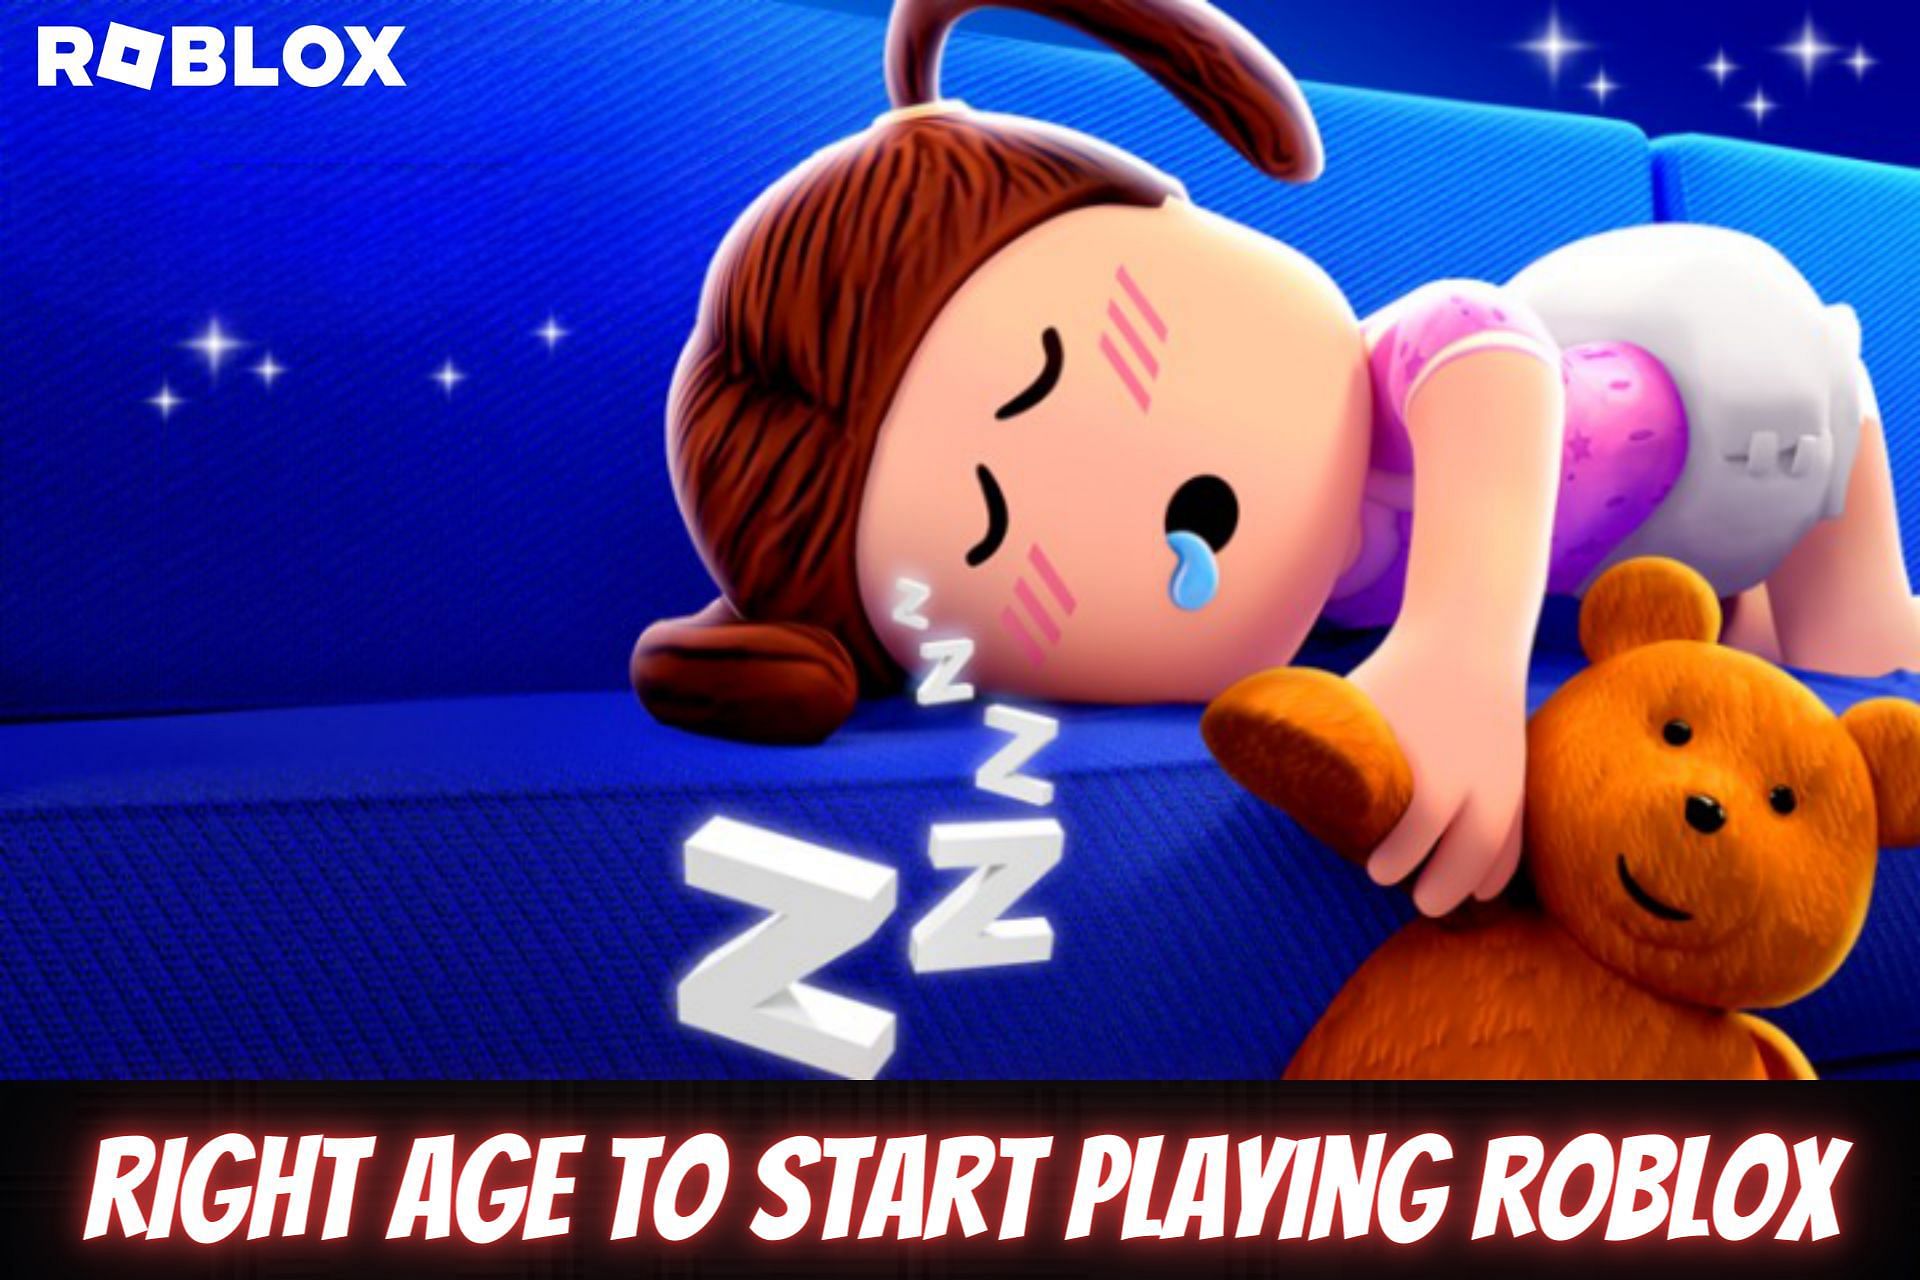 Your child can safely play on Roblox if you follow some basic rules (Image via Roblox)